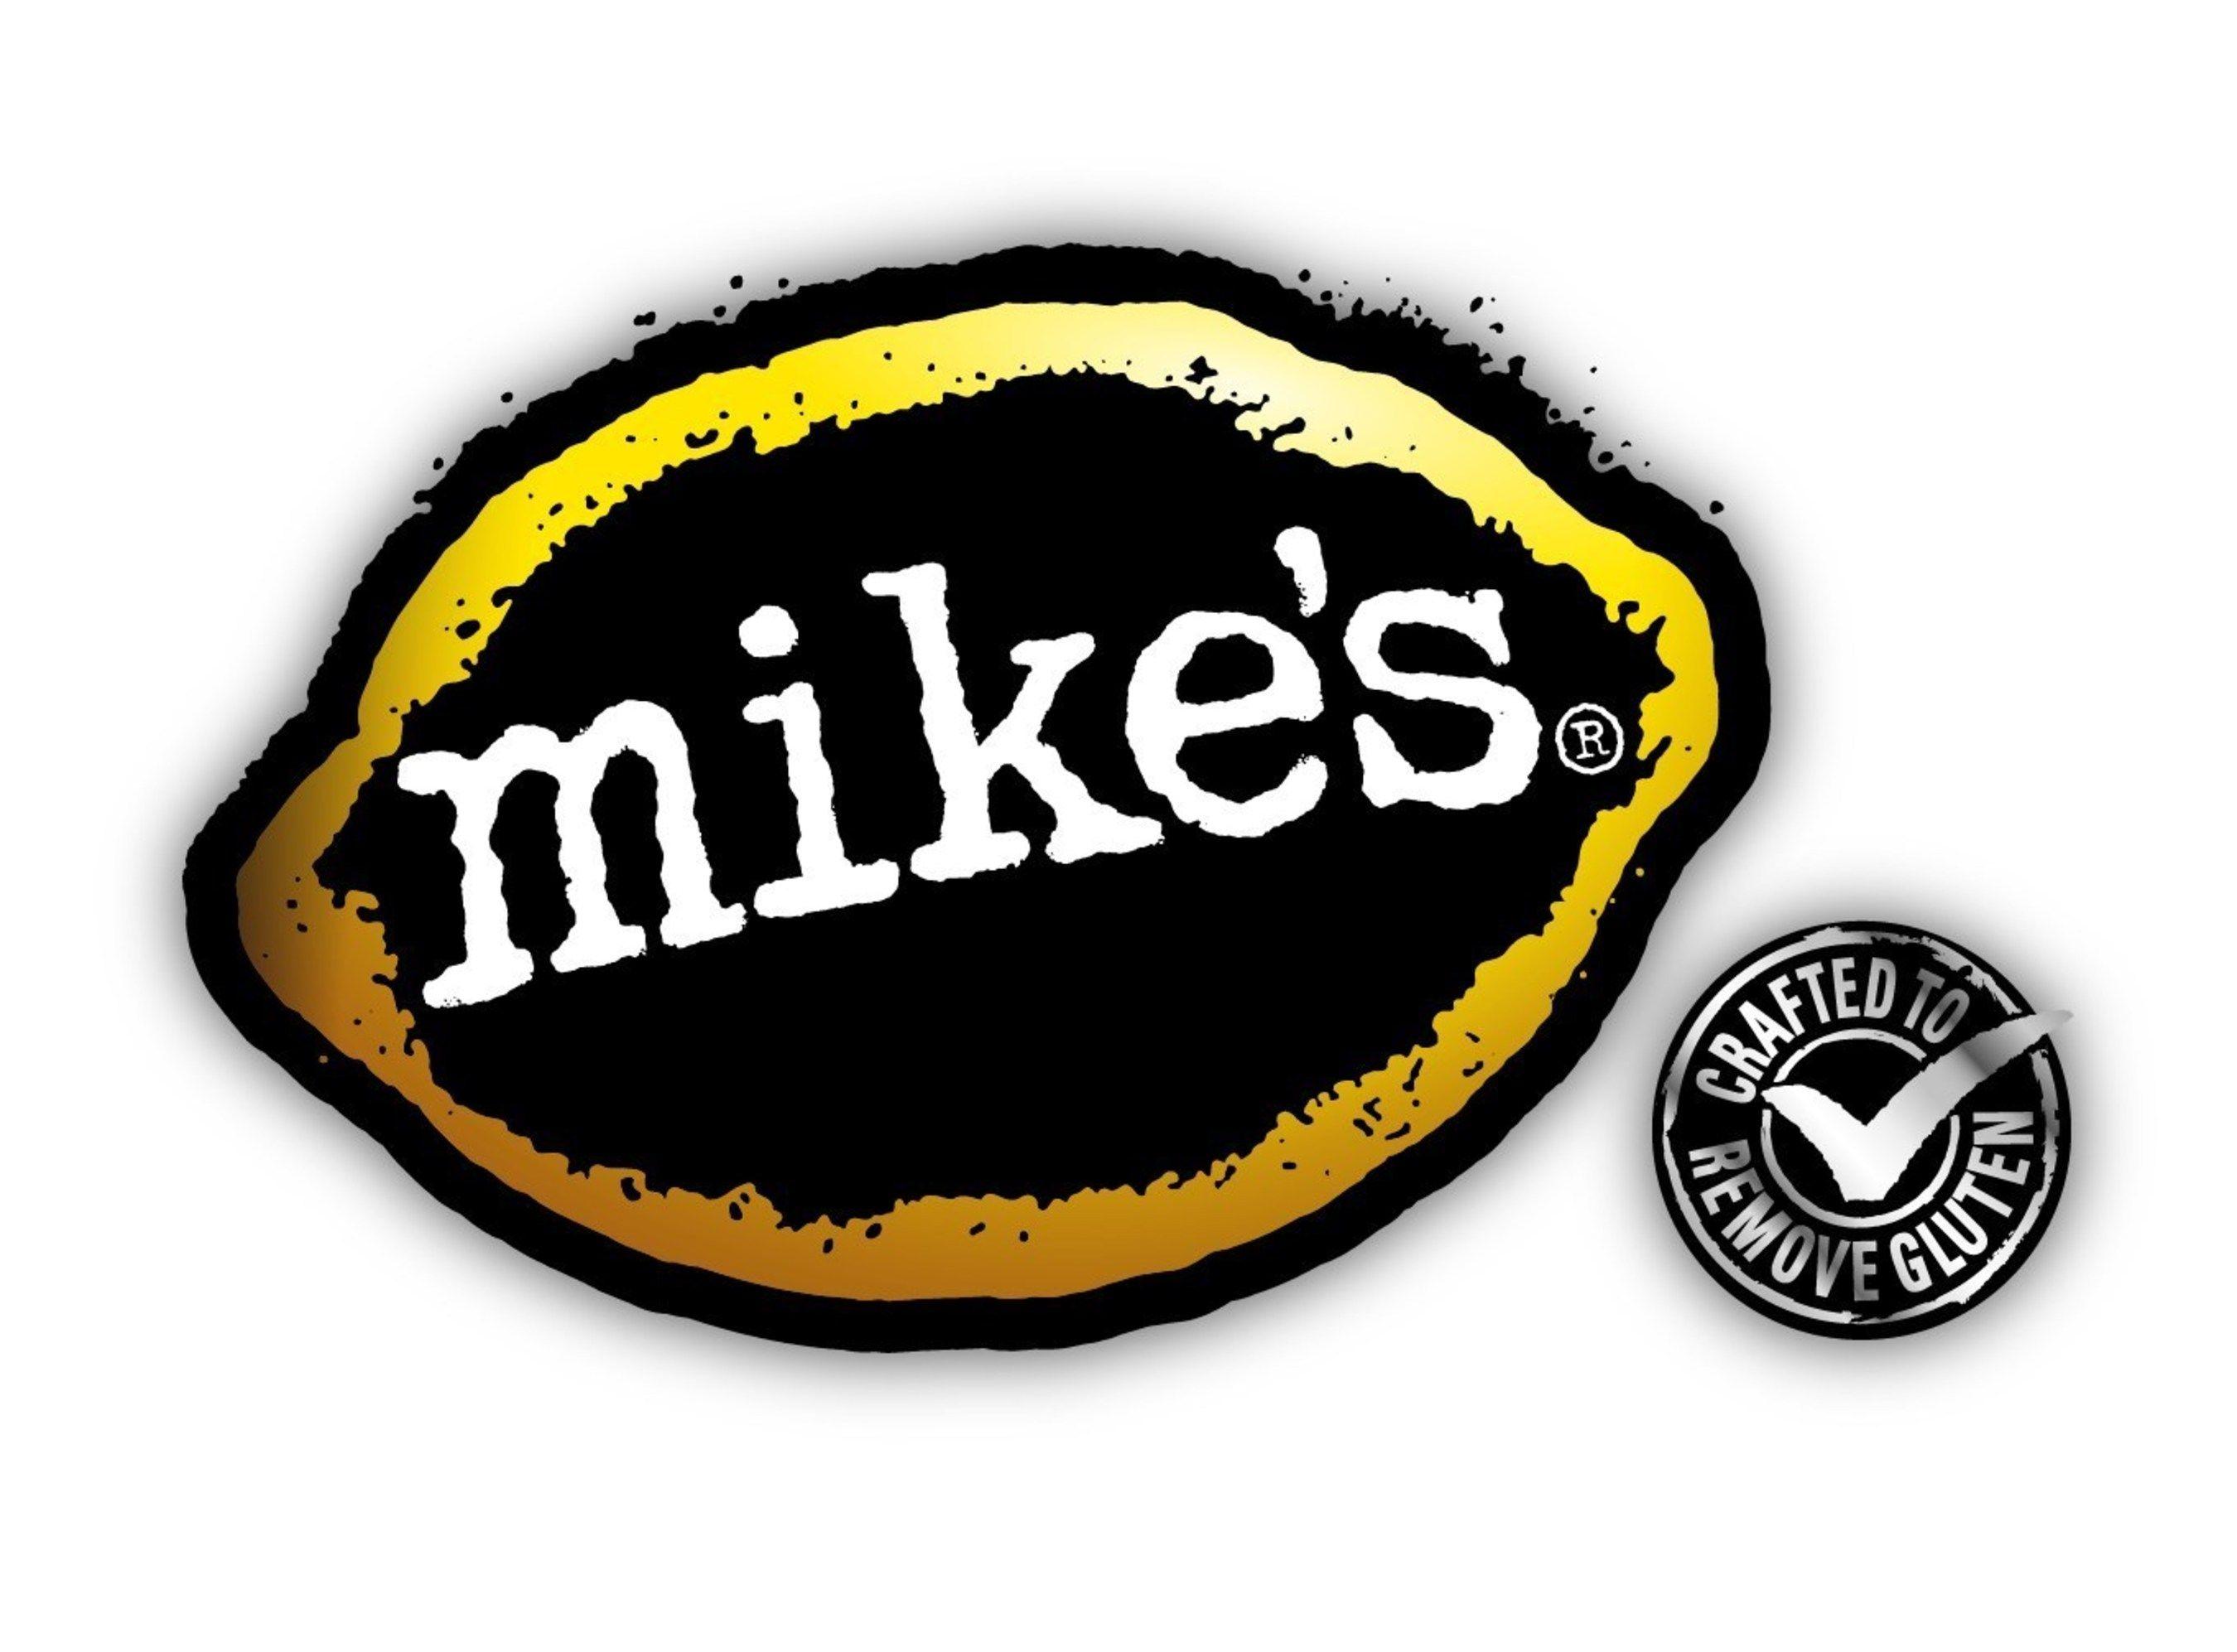 Mike's Logo - Mike's Hard Lemonade Co. Introduces New 'Crafted to Remove Gluten